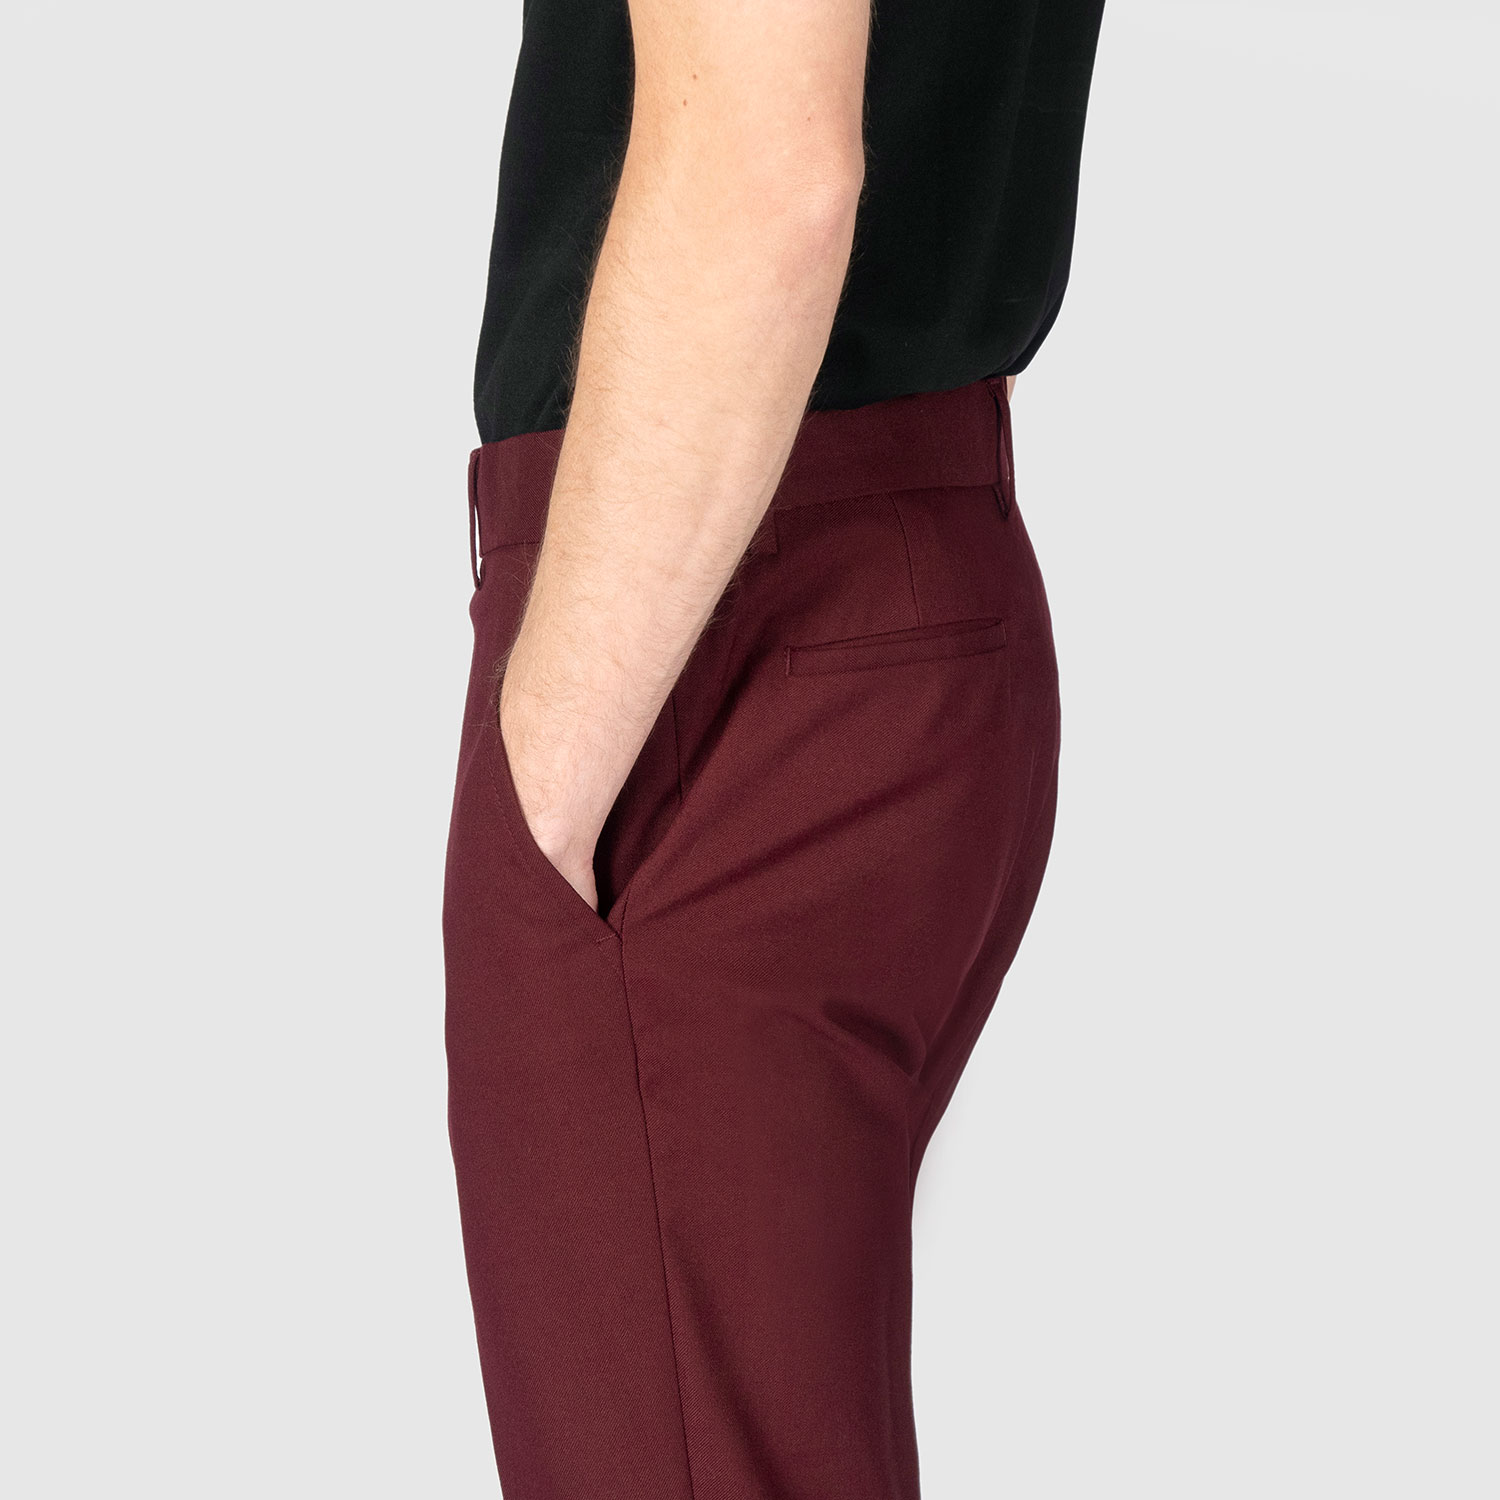 Buy Retro Burgundy Casual Pants - Shoptery